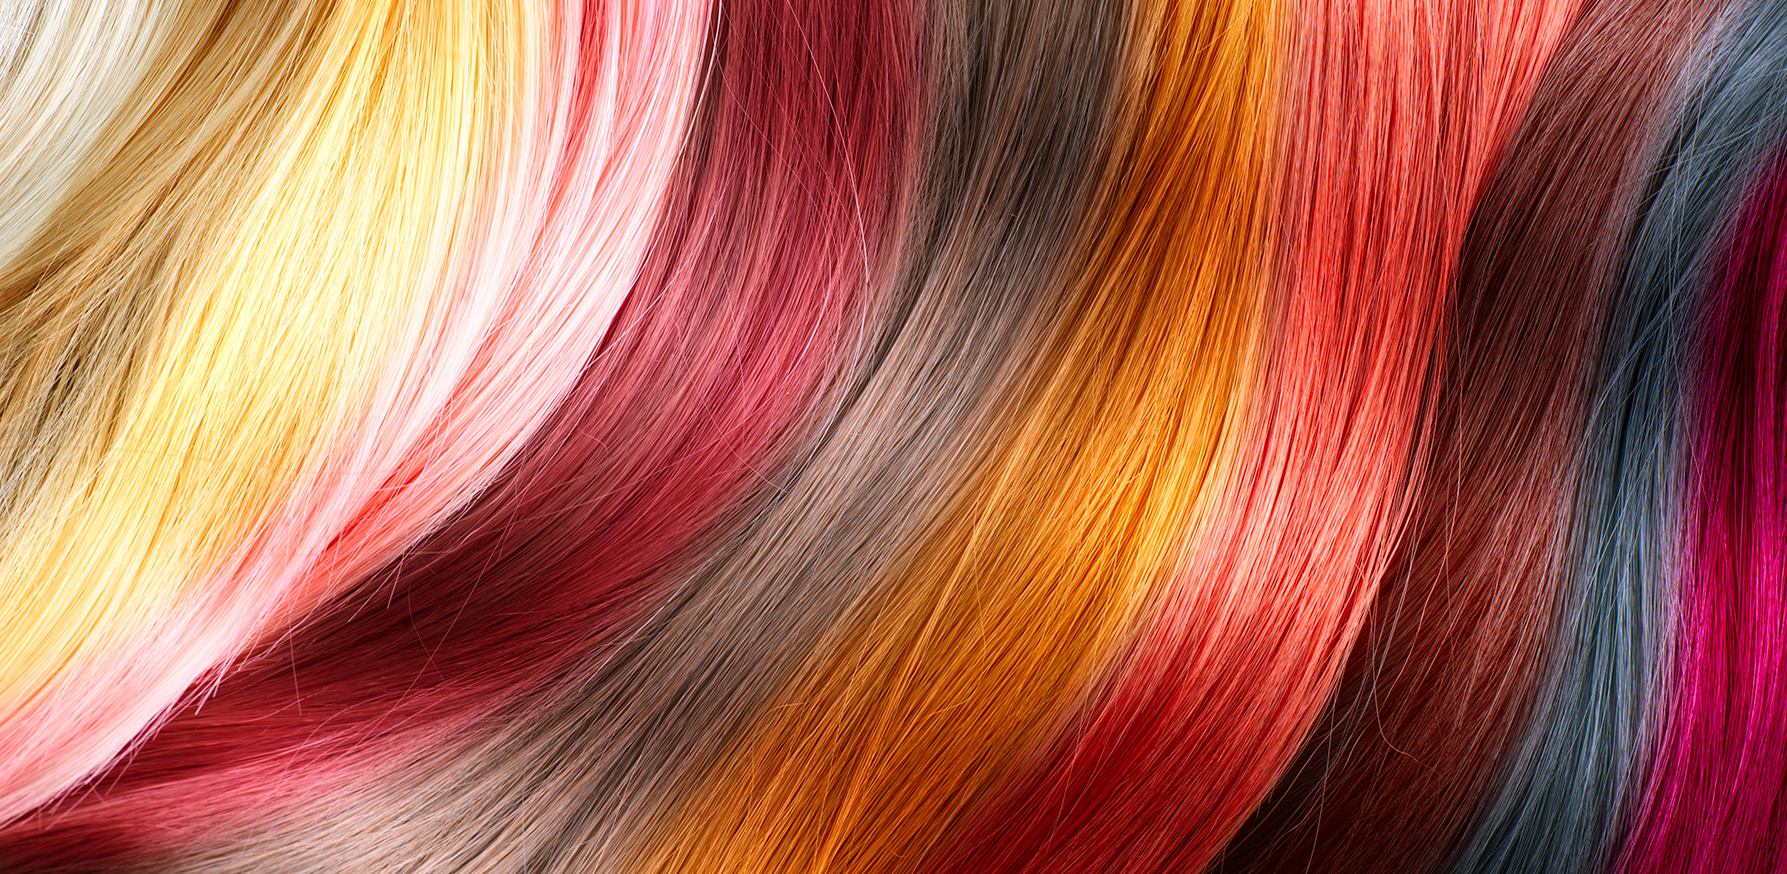 why-you-should-consider-dying-your-hair-a-vibrant-color-this-winter-hair-dye-hair-colors